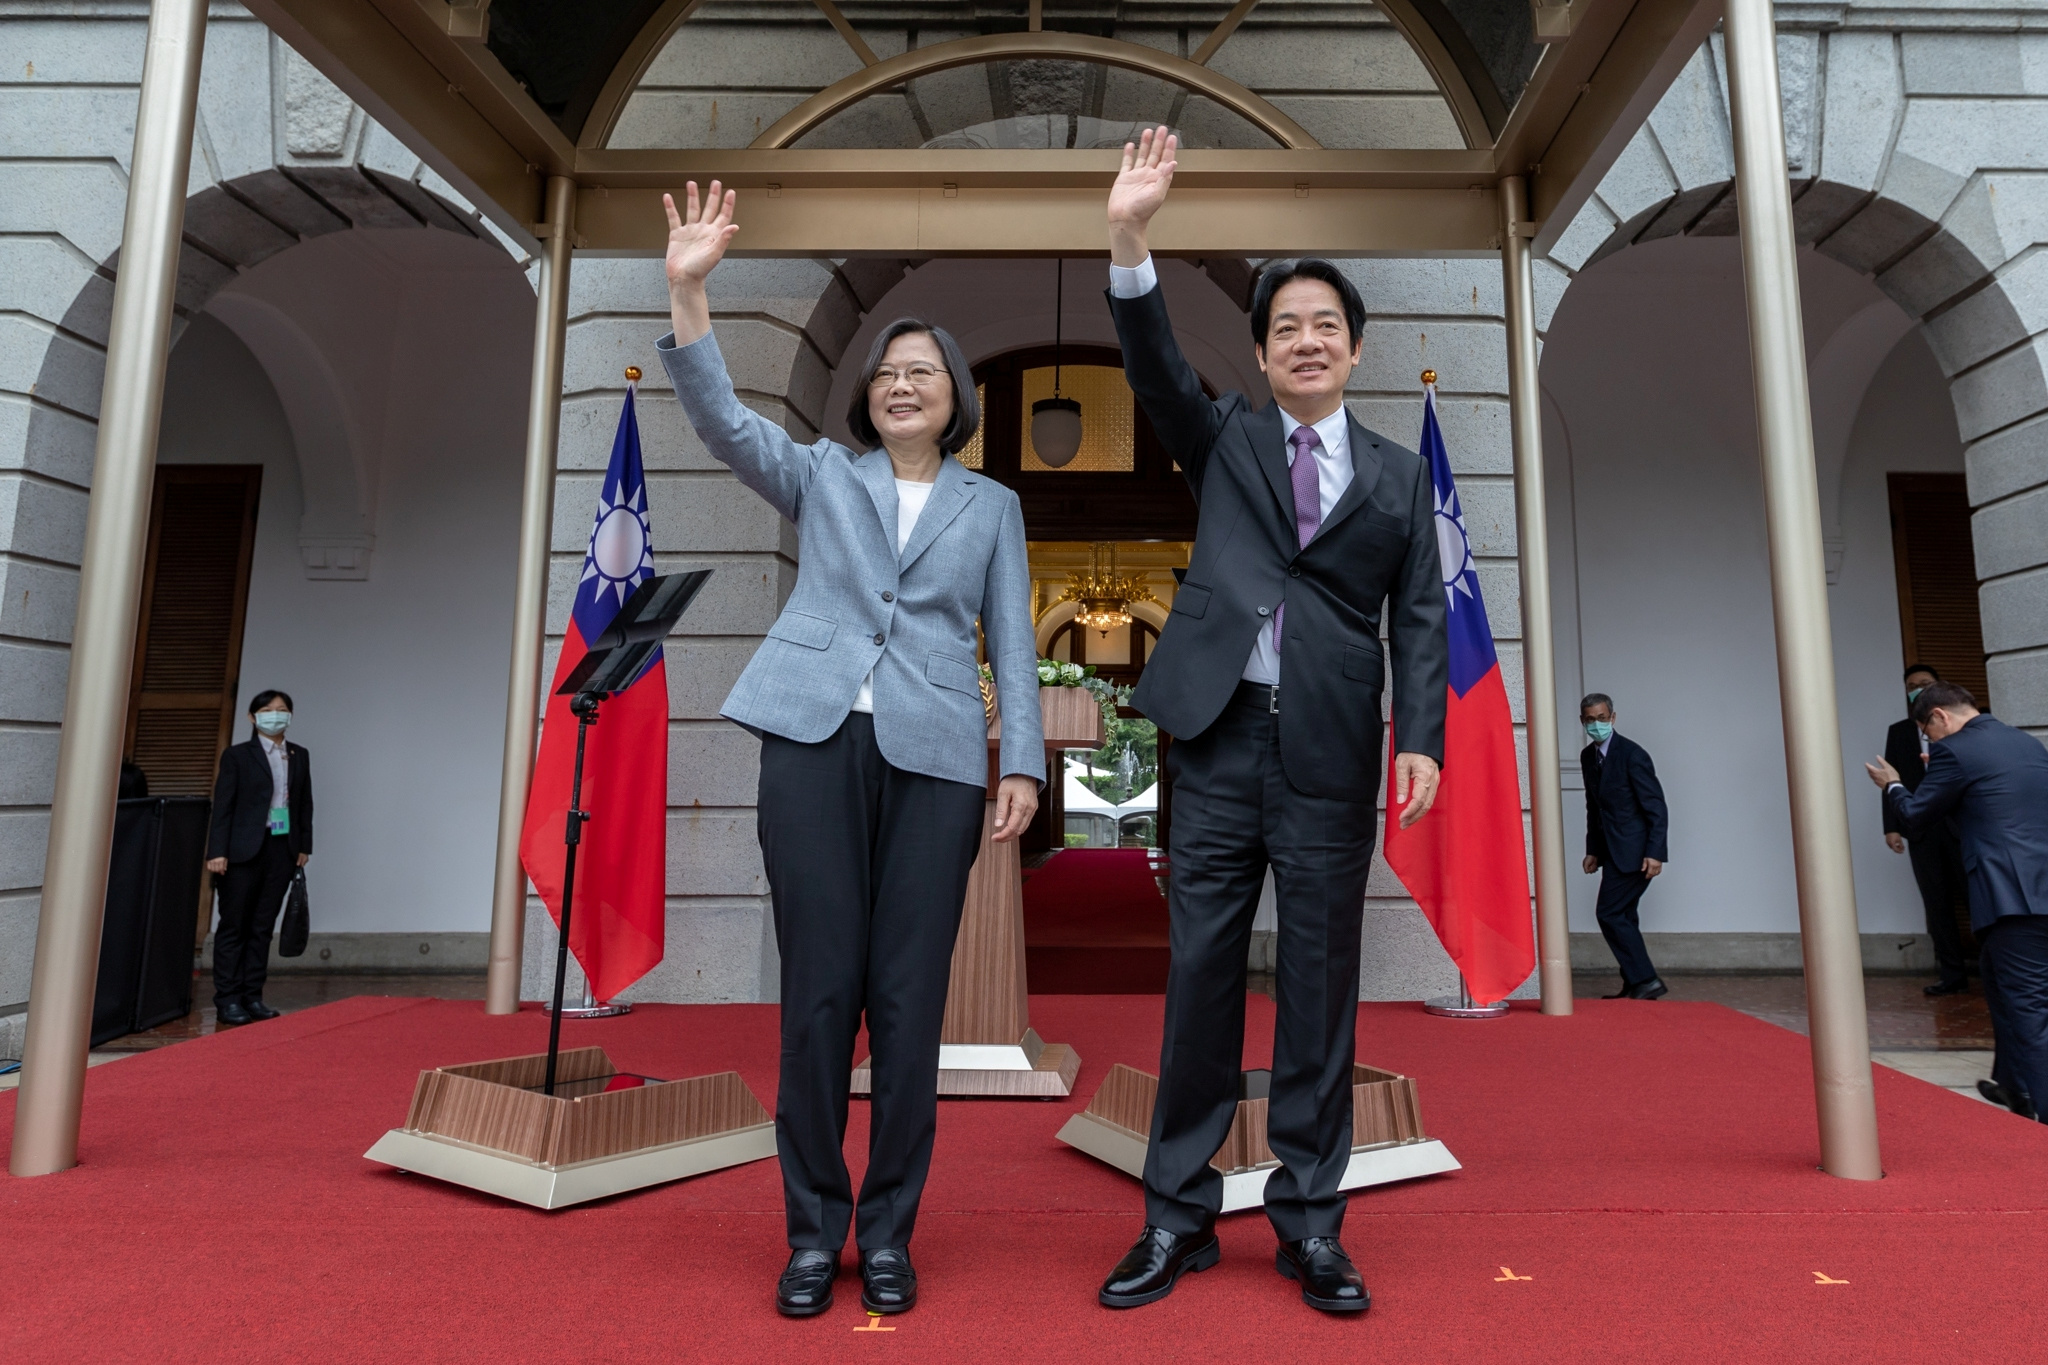 Taiwan President Tsai Ing-wen attends with Vice President William Lai Ching-te her inaugural address at the Taipei Guest House in Taipei on May 20. | HANDOUT / VIA REUTERS